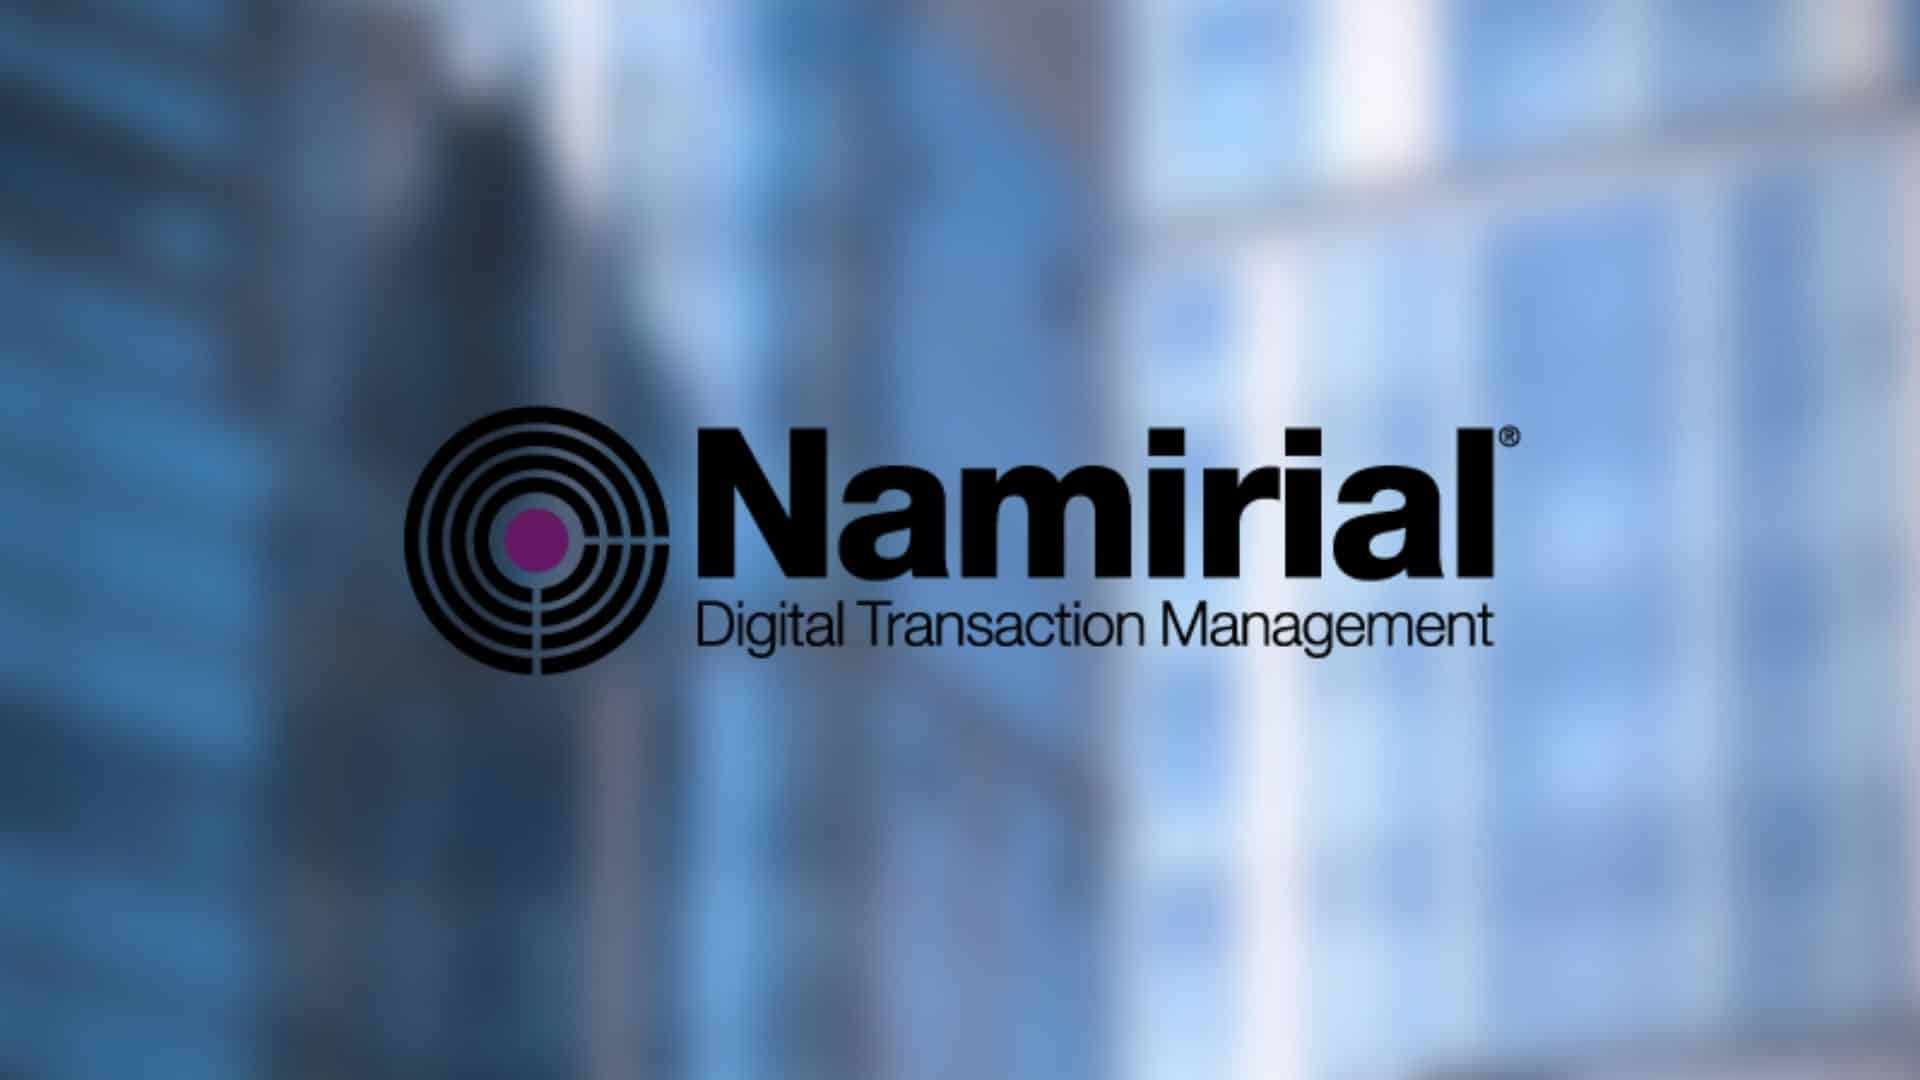 Namirial logo with sky scraper buildings in the background